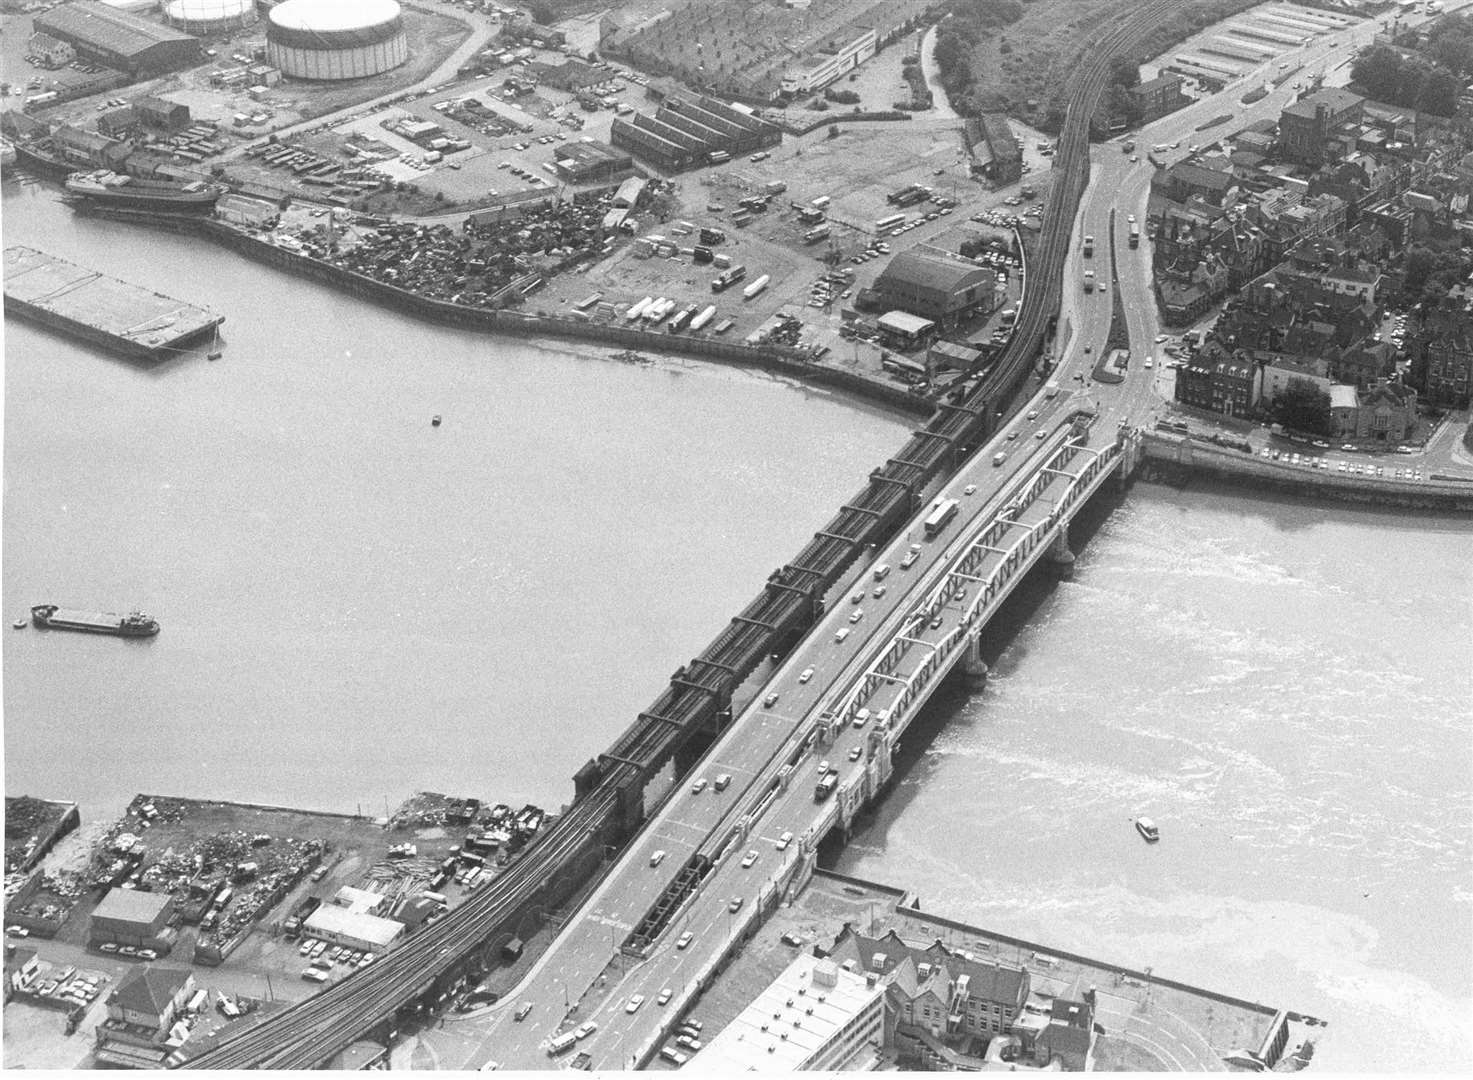 Rochester Bridge pictured in July 1986